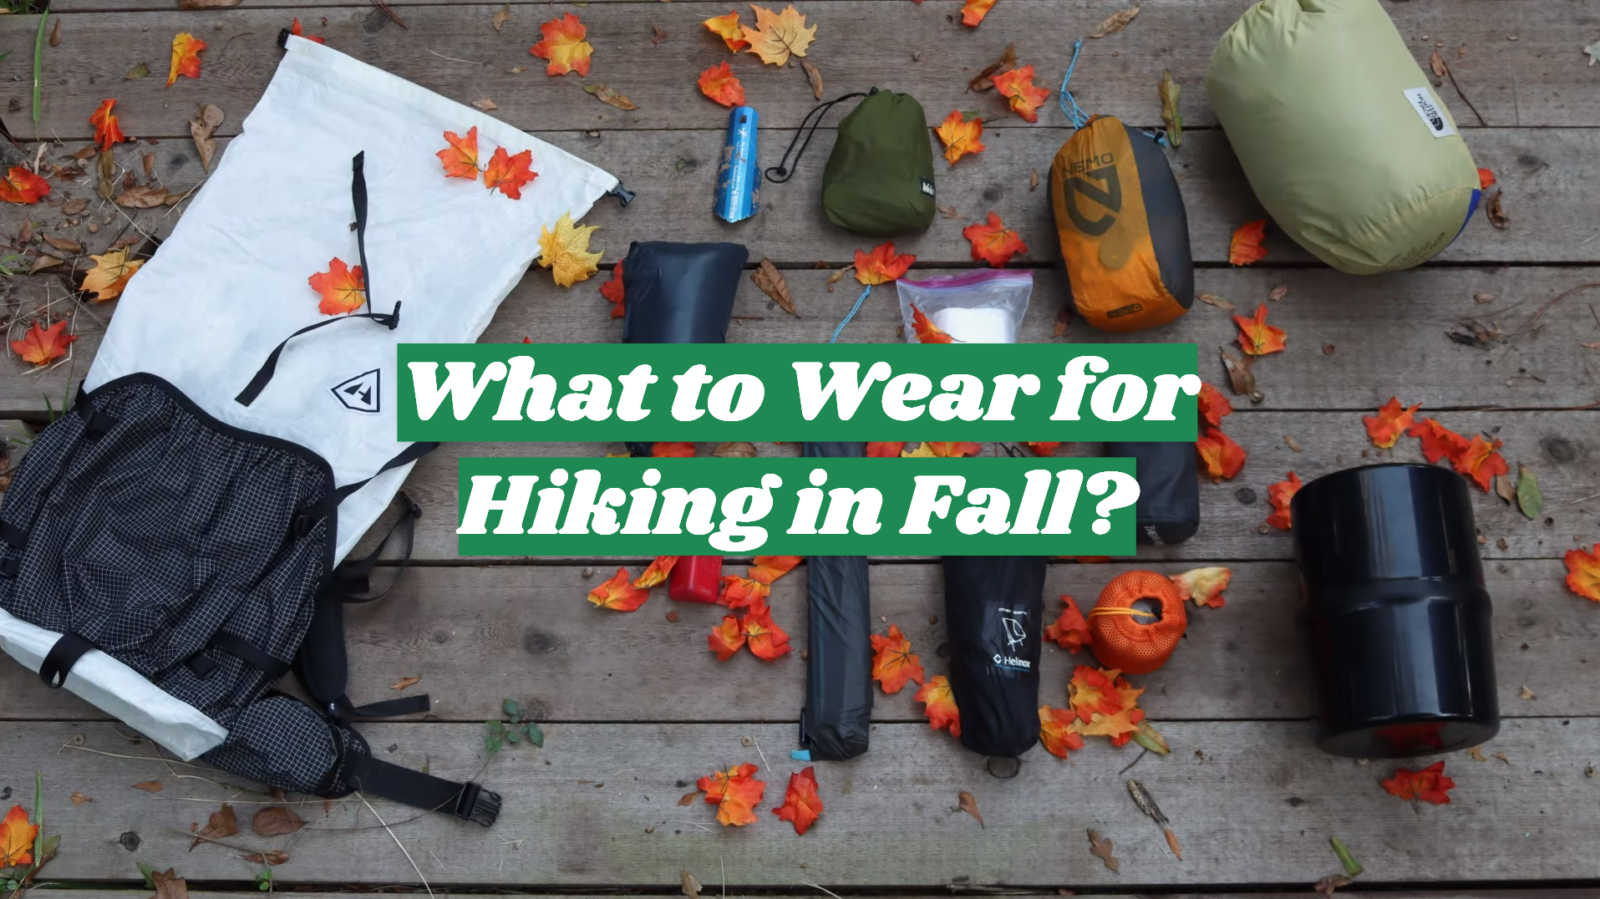 What to Wear for Hiking in Fall?